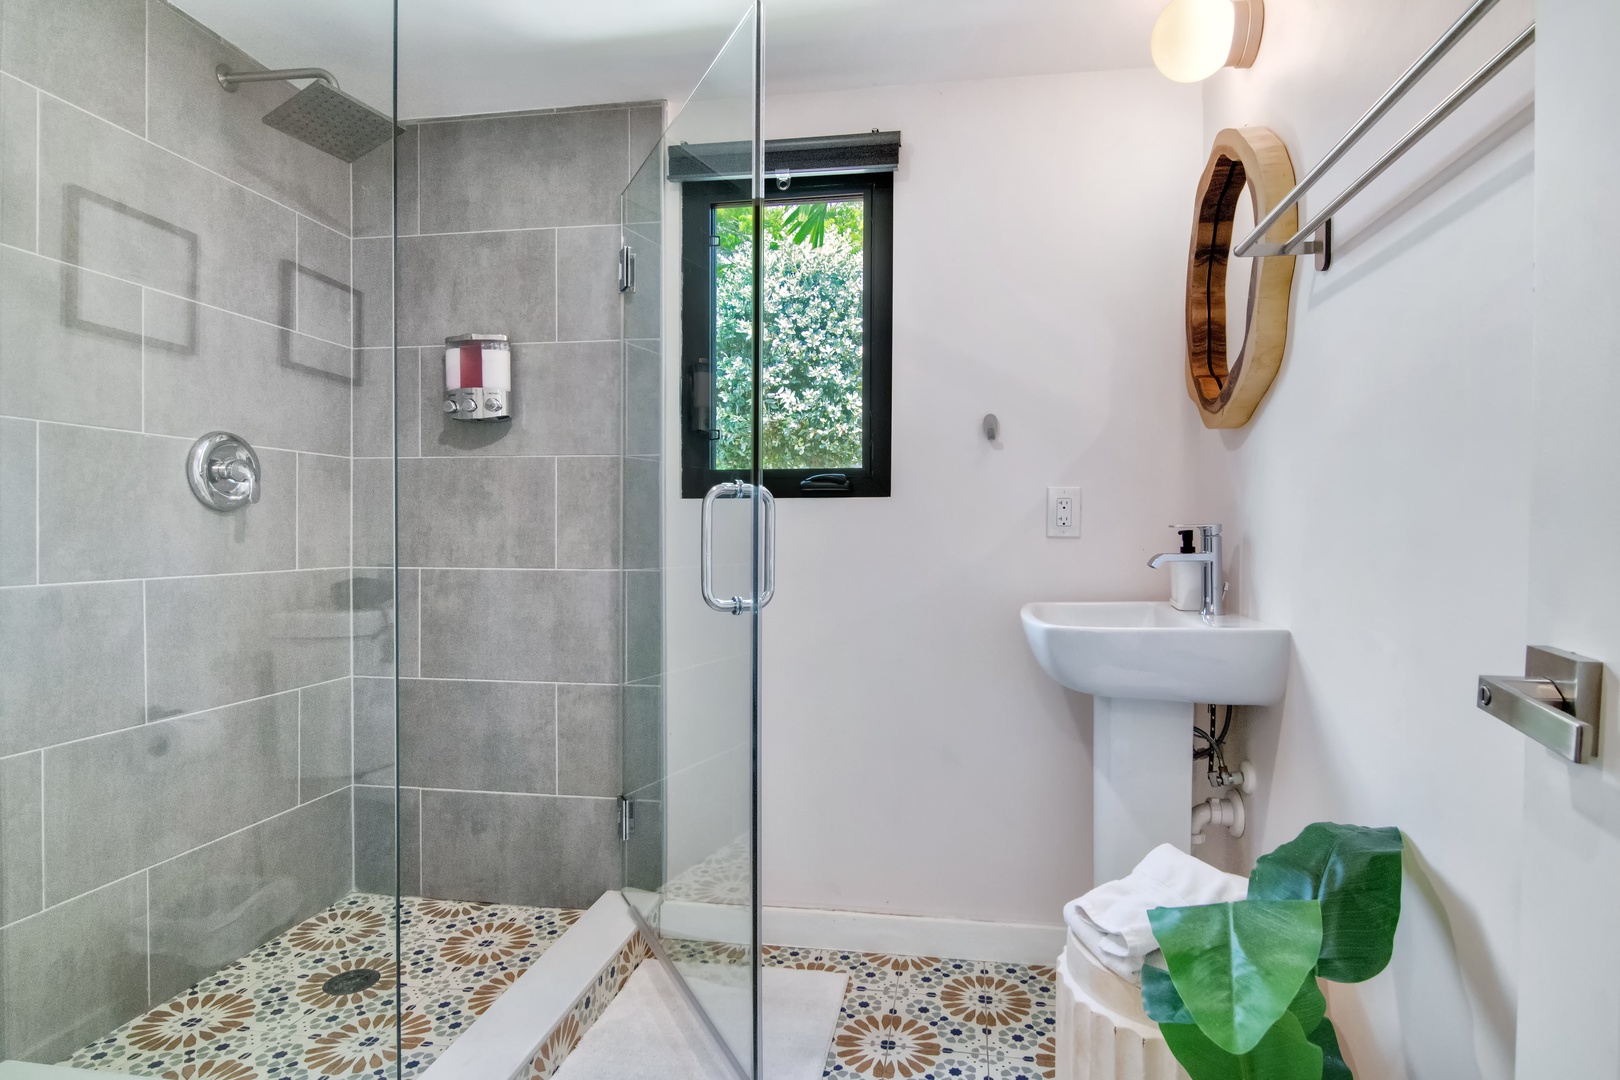 Shared bathroom with stand-up shower